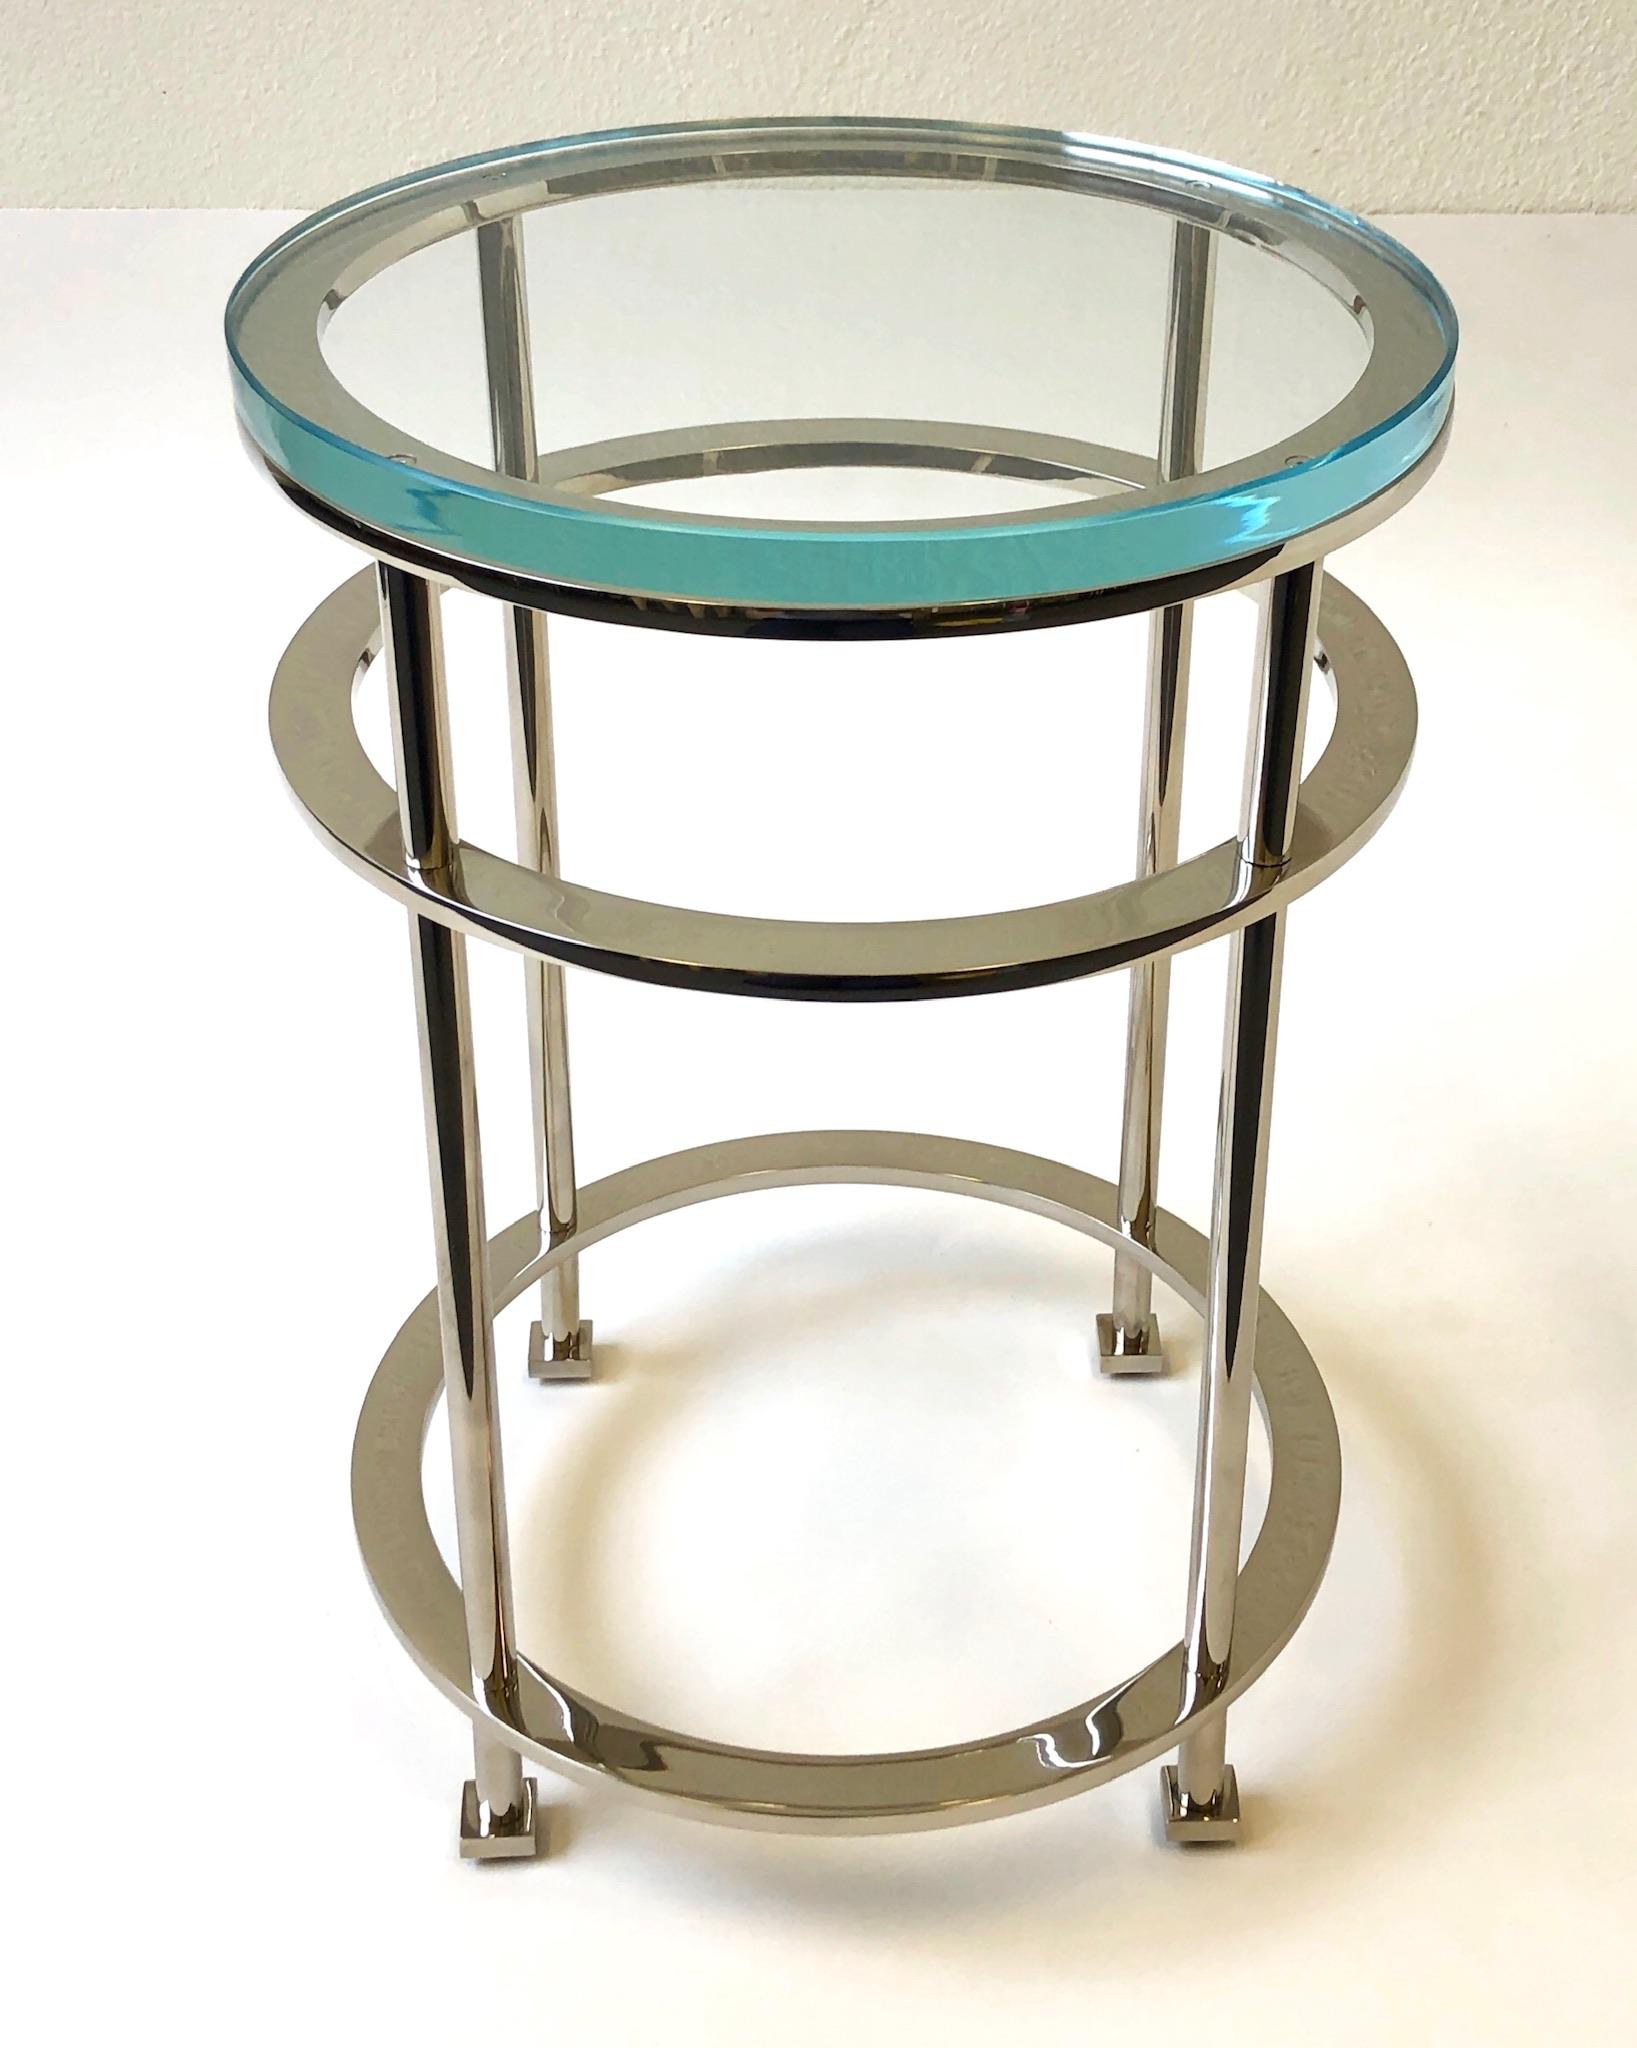 Polished Pair of Nickel and Lucite Side Tables by Jean Michel Wilmotte for Mirak